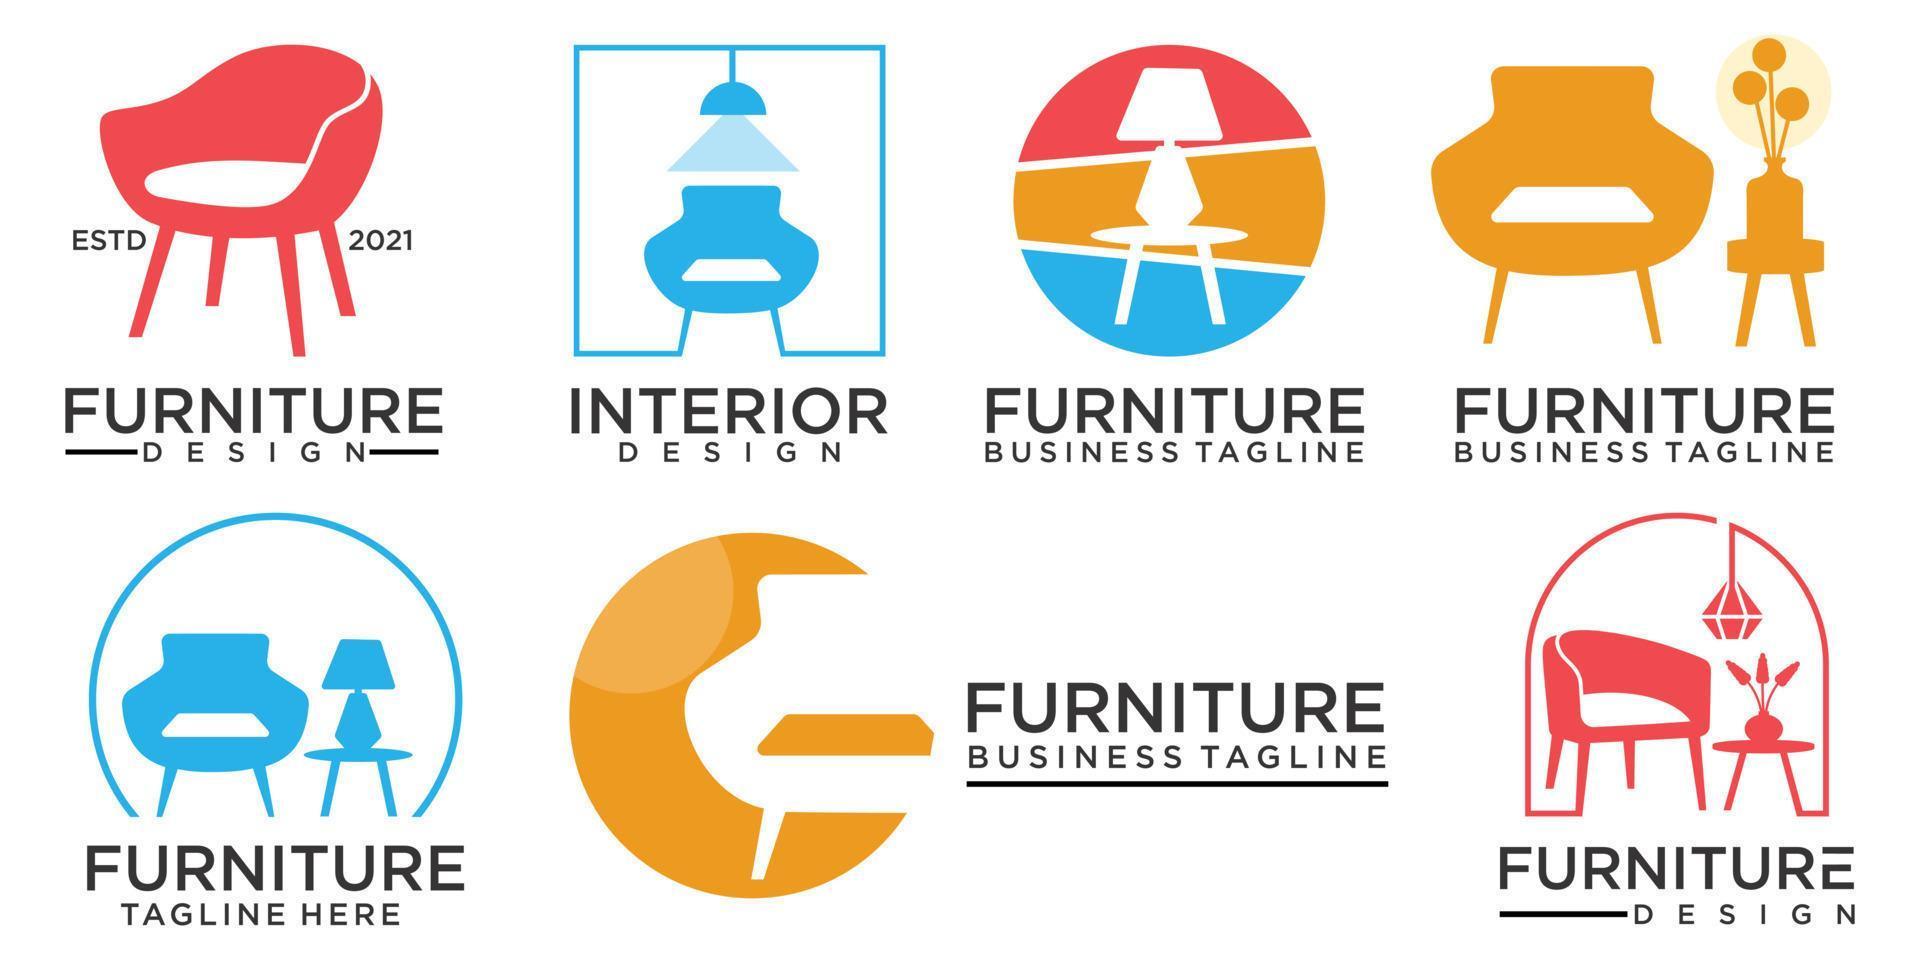 Colorful furniture logo. Symbol and icon set of chairs, sofas, tables, and home furnishings. vector